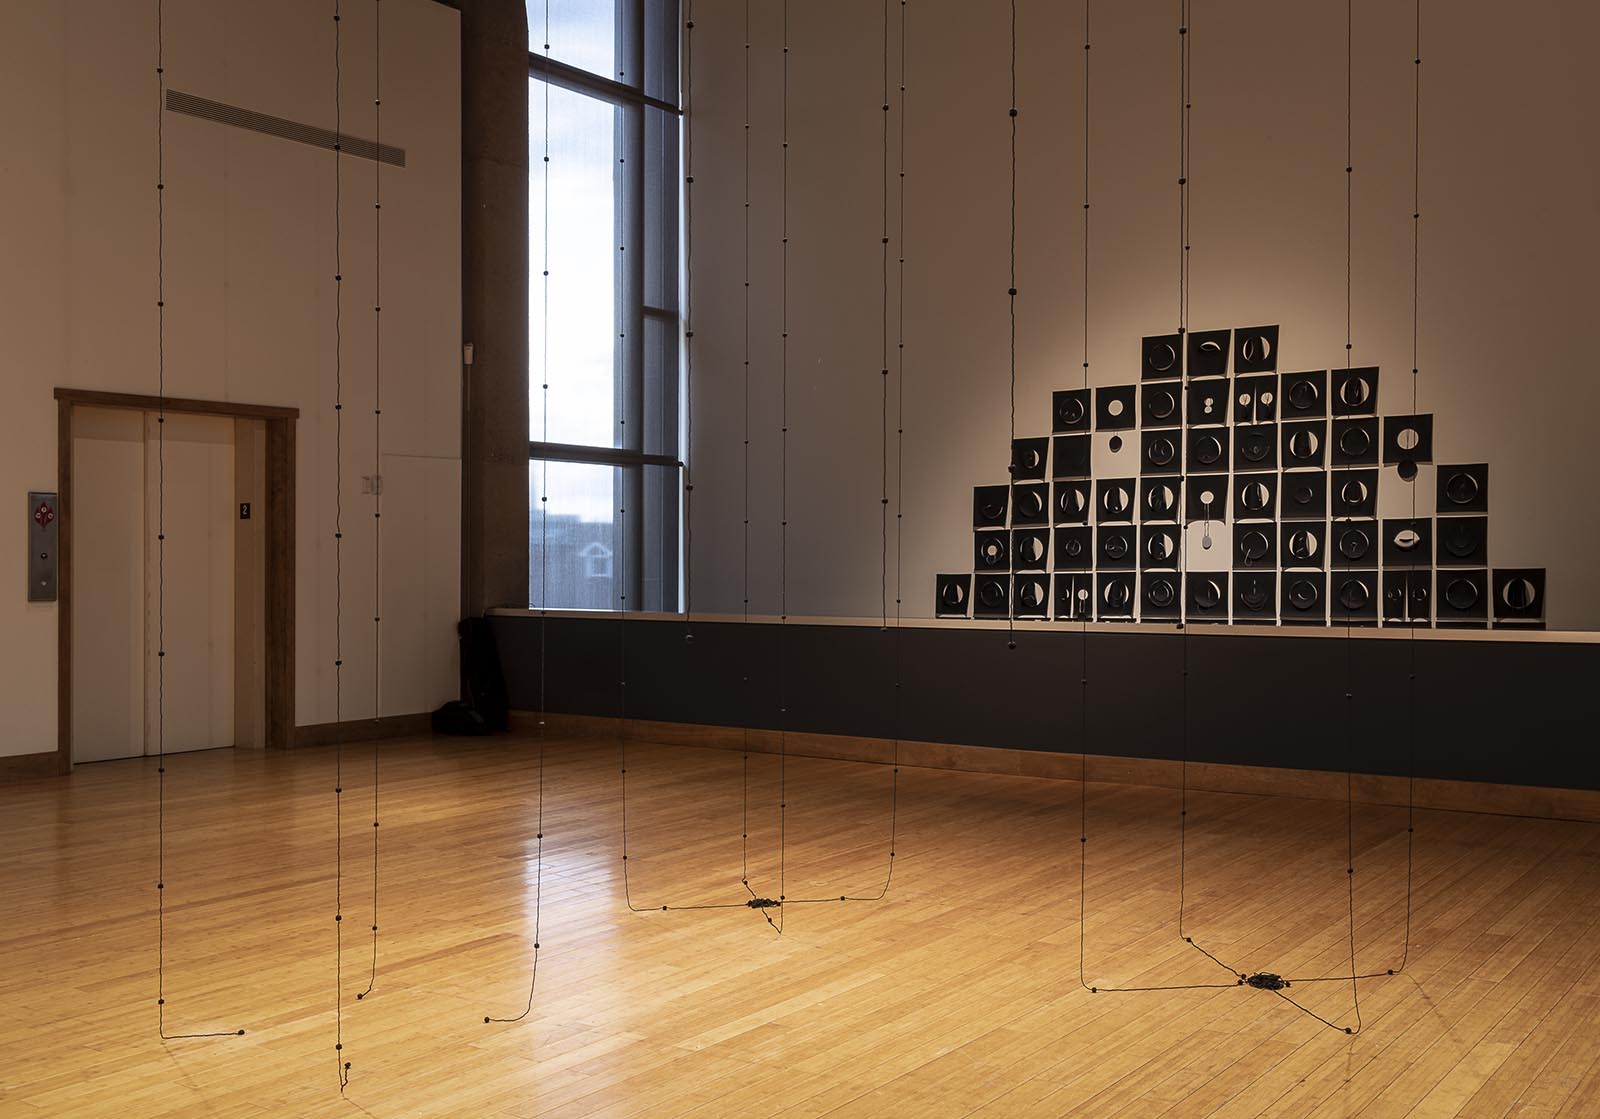 Installation view of "Within/Without". 2022. Glass beads, nylon thread. Installed from within drop ceiling. Seen here with "Squaring Circles" in the background.